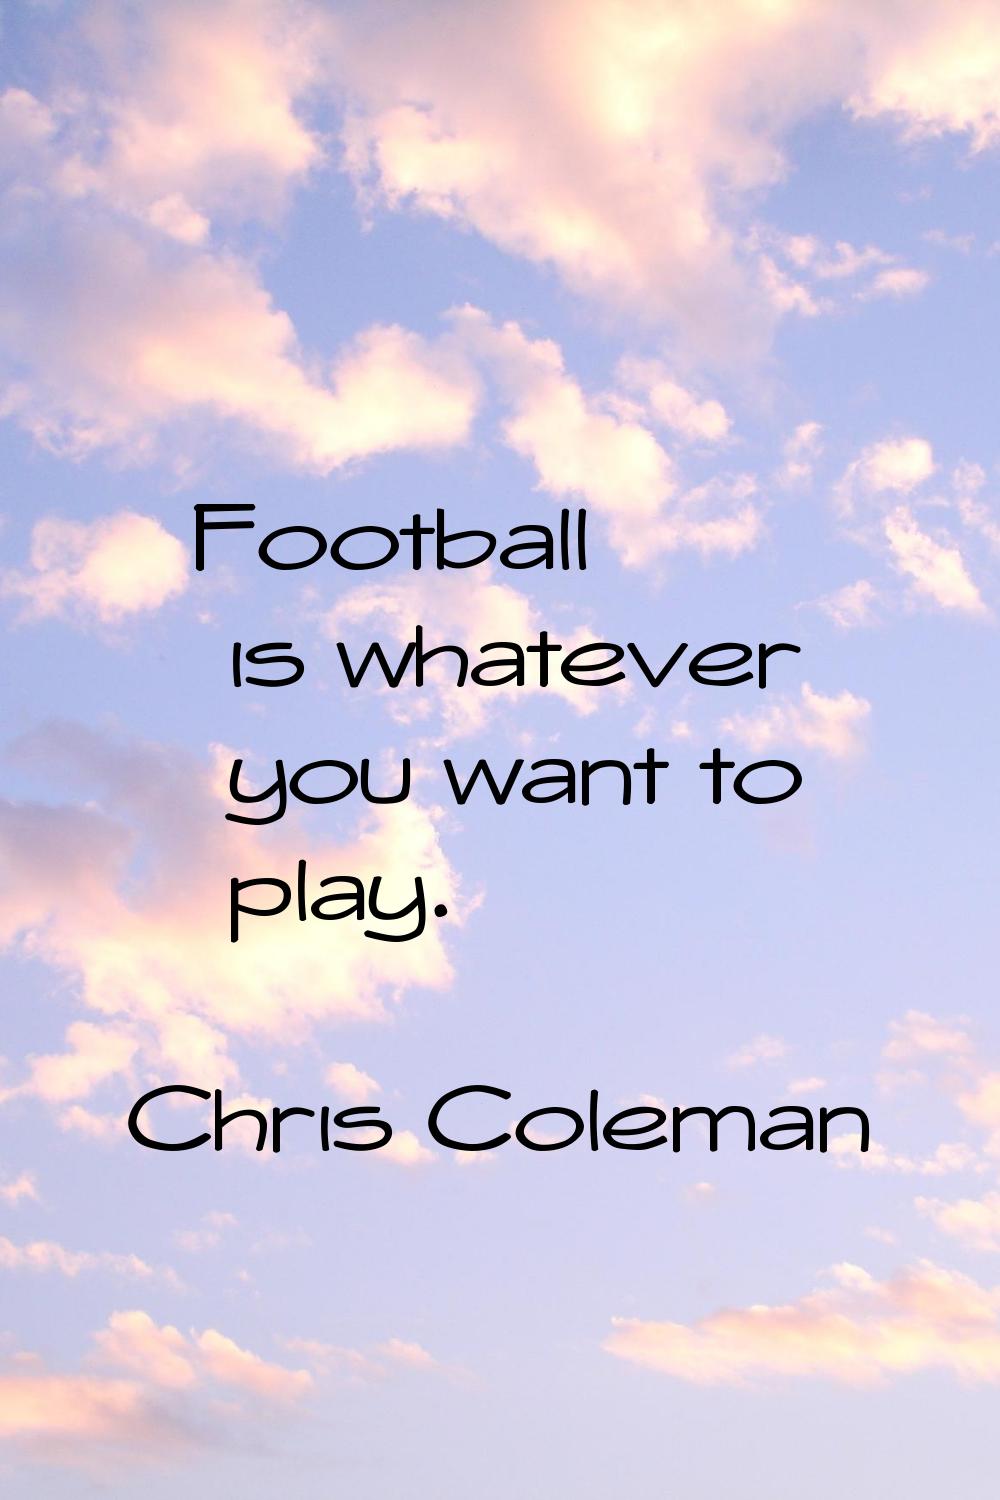 Football is whatever you want to play.